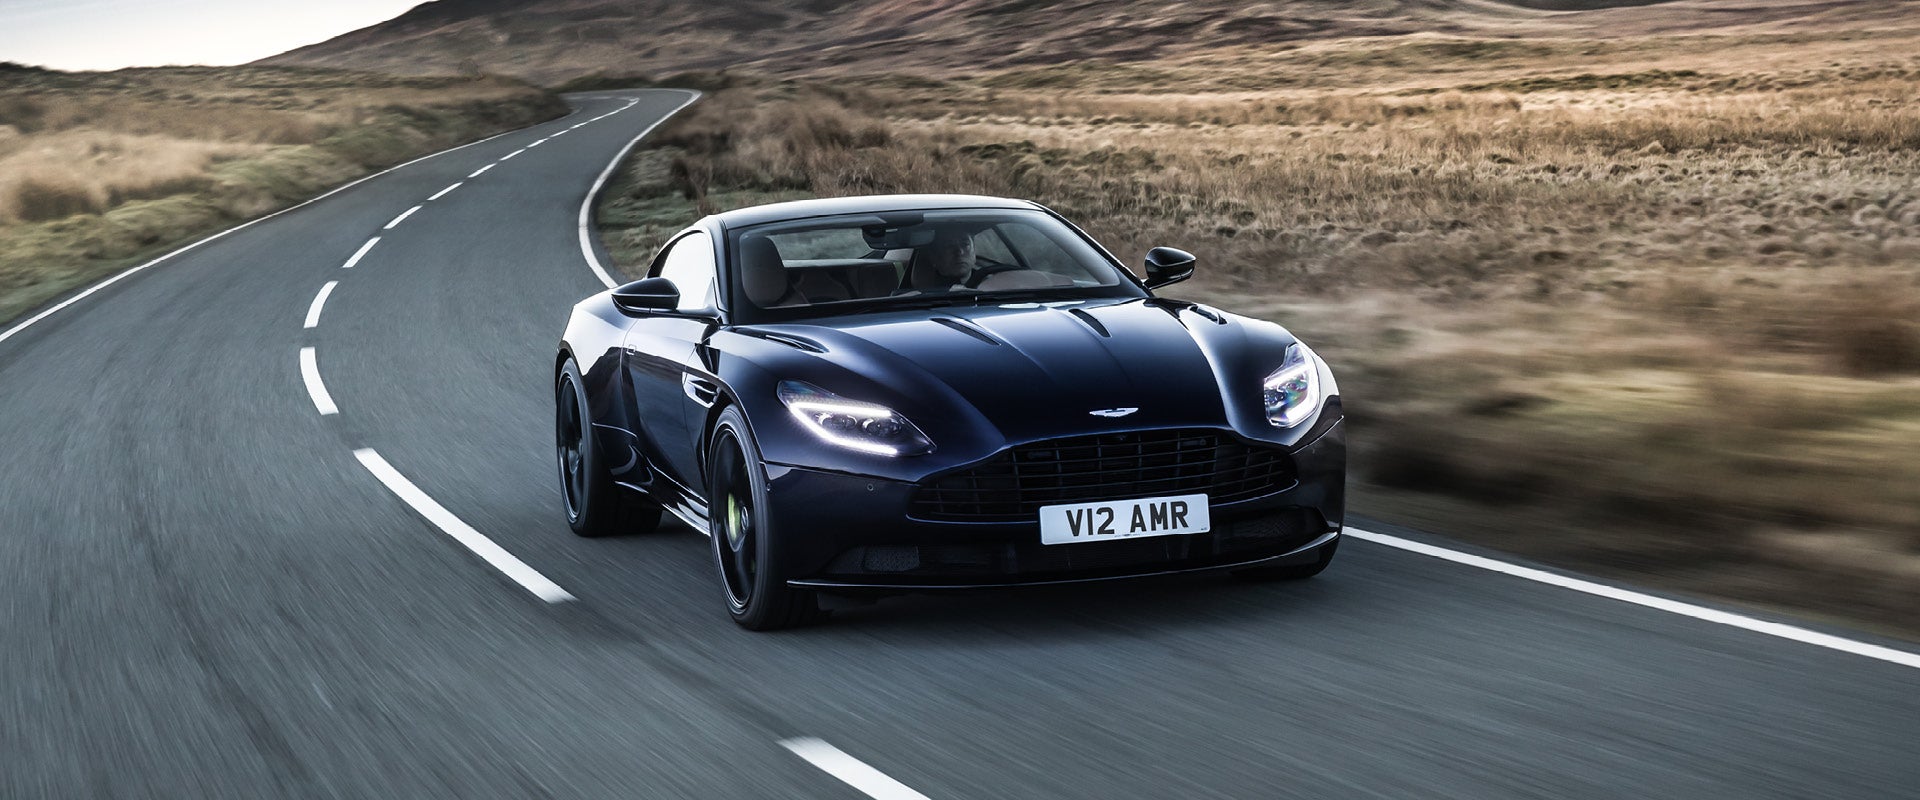 Who Owns Aston Martin? Models and Brand History